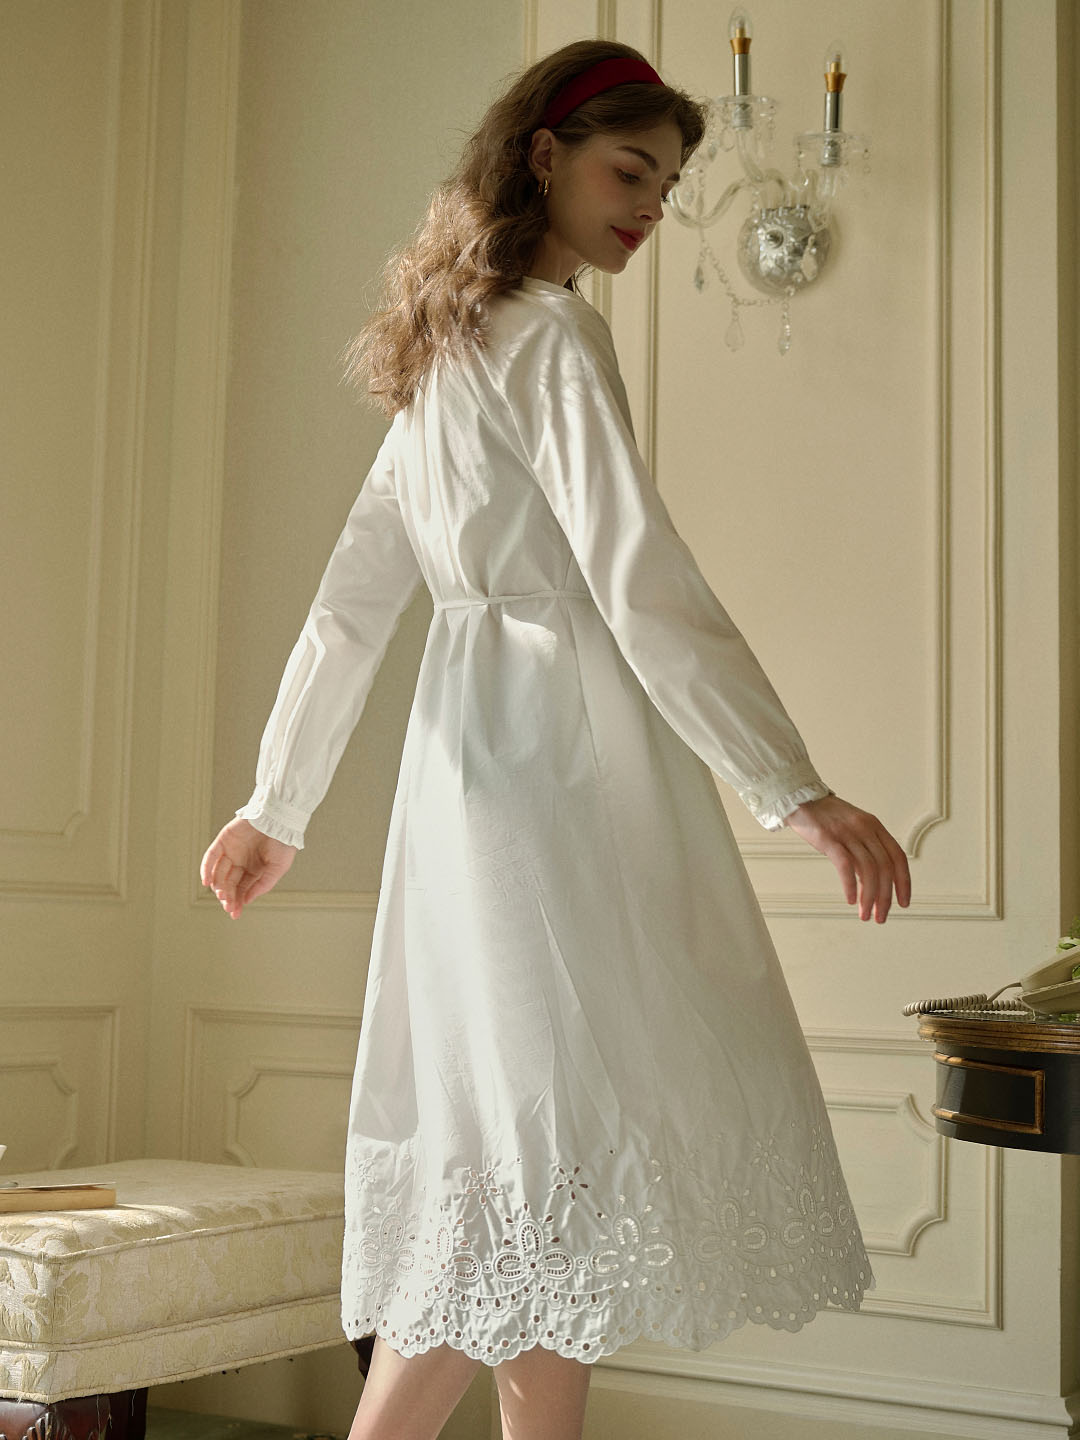 Lilly Round Neck Hem Hollow Embroidered Cotton Dress